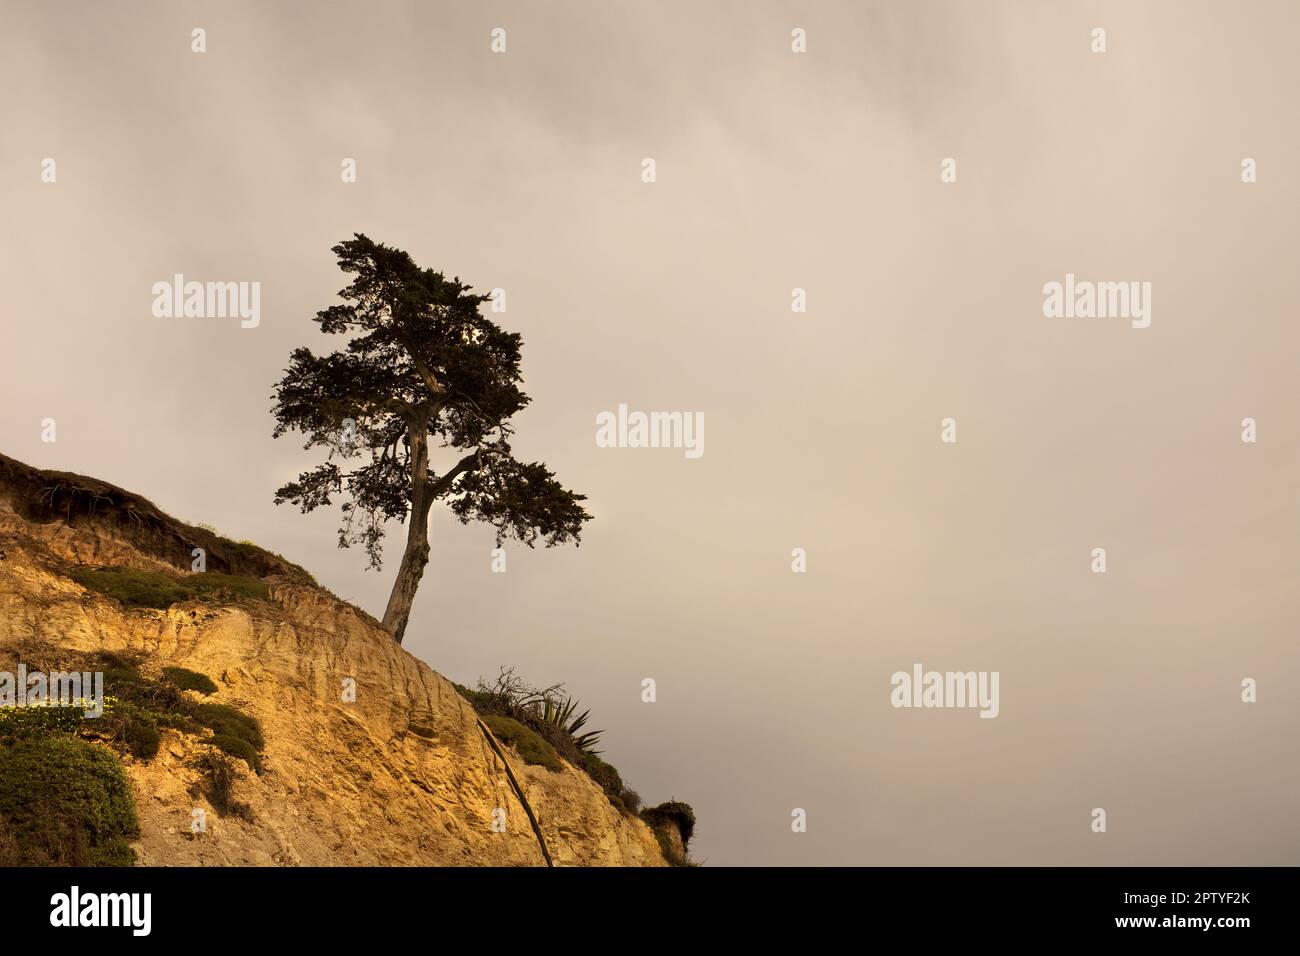 Lone Tree at edge of Windswept Cliff against Cloudy Sky Stock Photo